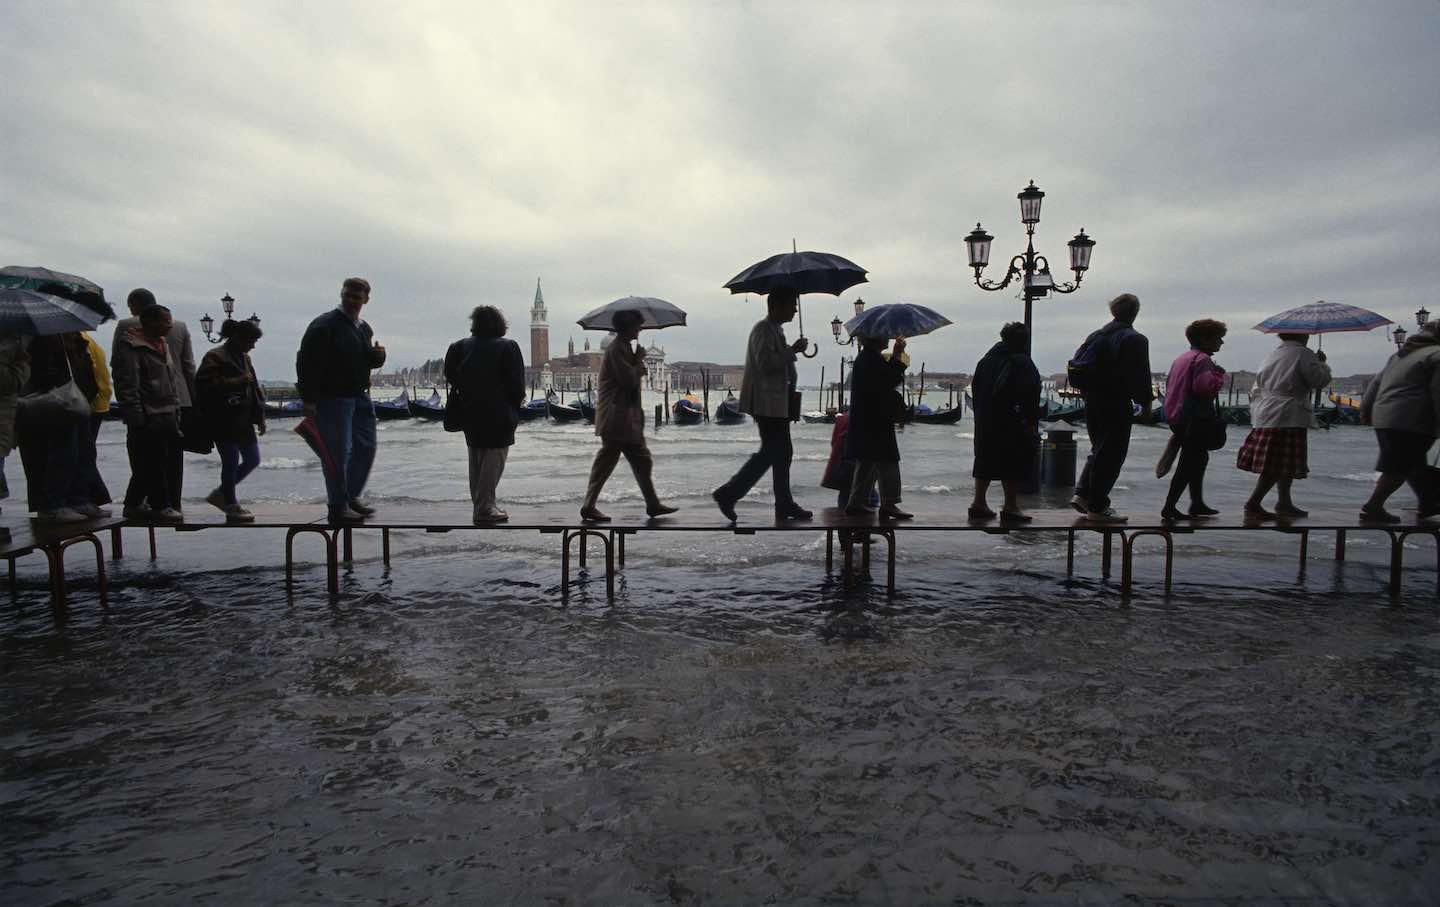 Locals and tourists walk on gangplanks through the flooded city center of Venice.